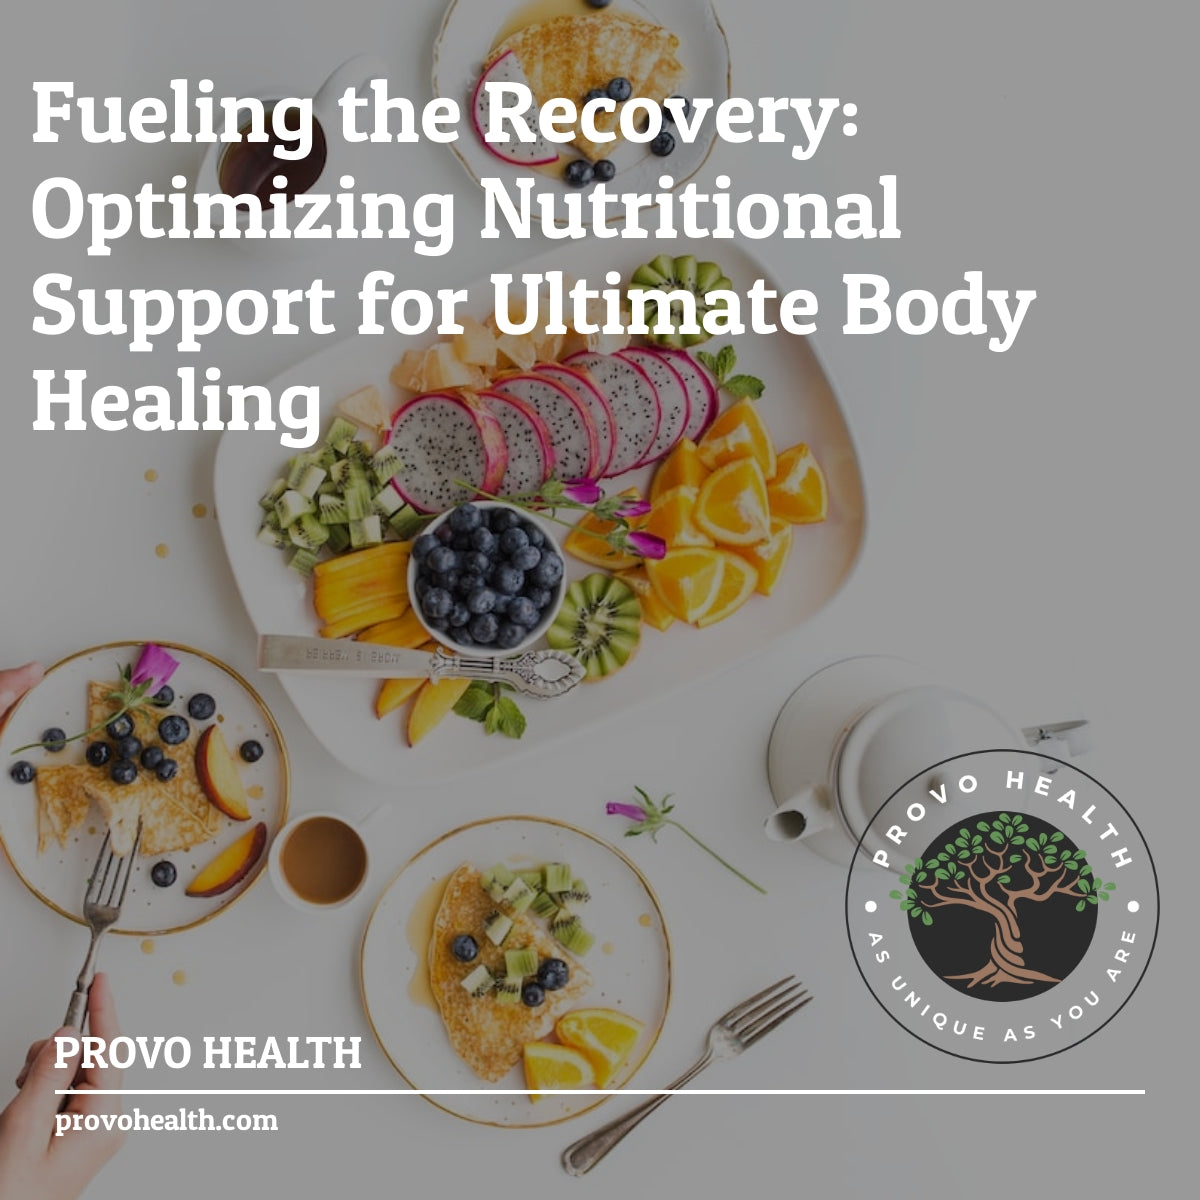 Fueling the Recovery: Optimizing Nutritional Support for Ultimate Body Healing